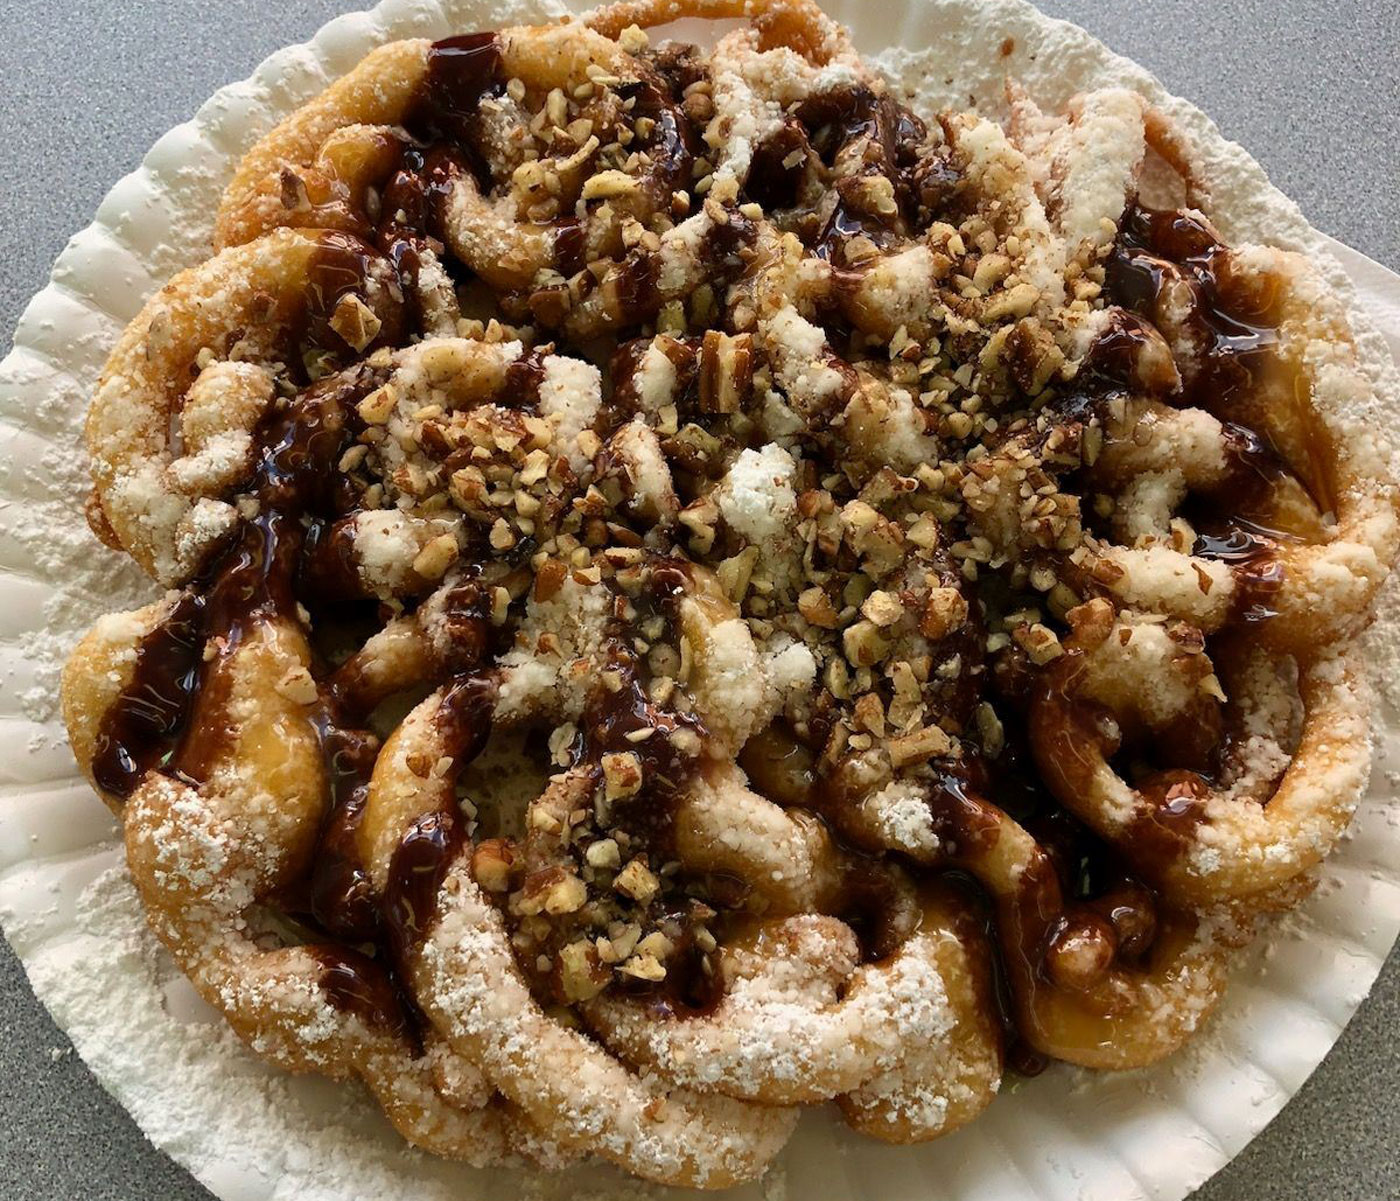 Paulette's Salted Caramel Turtle Funnel Cake at the Georgia State Fair